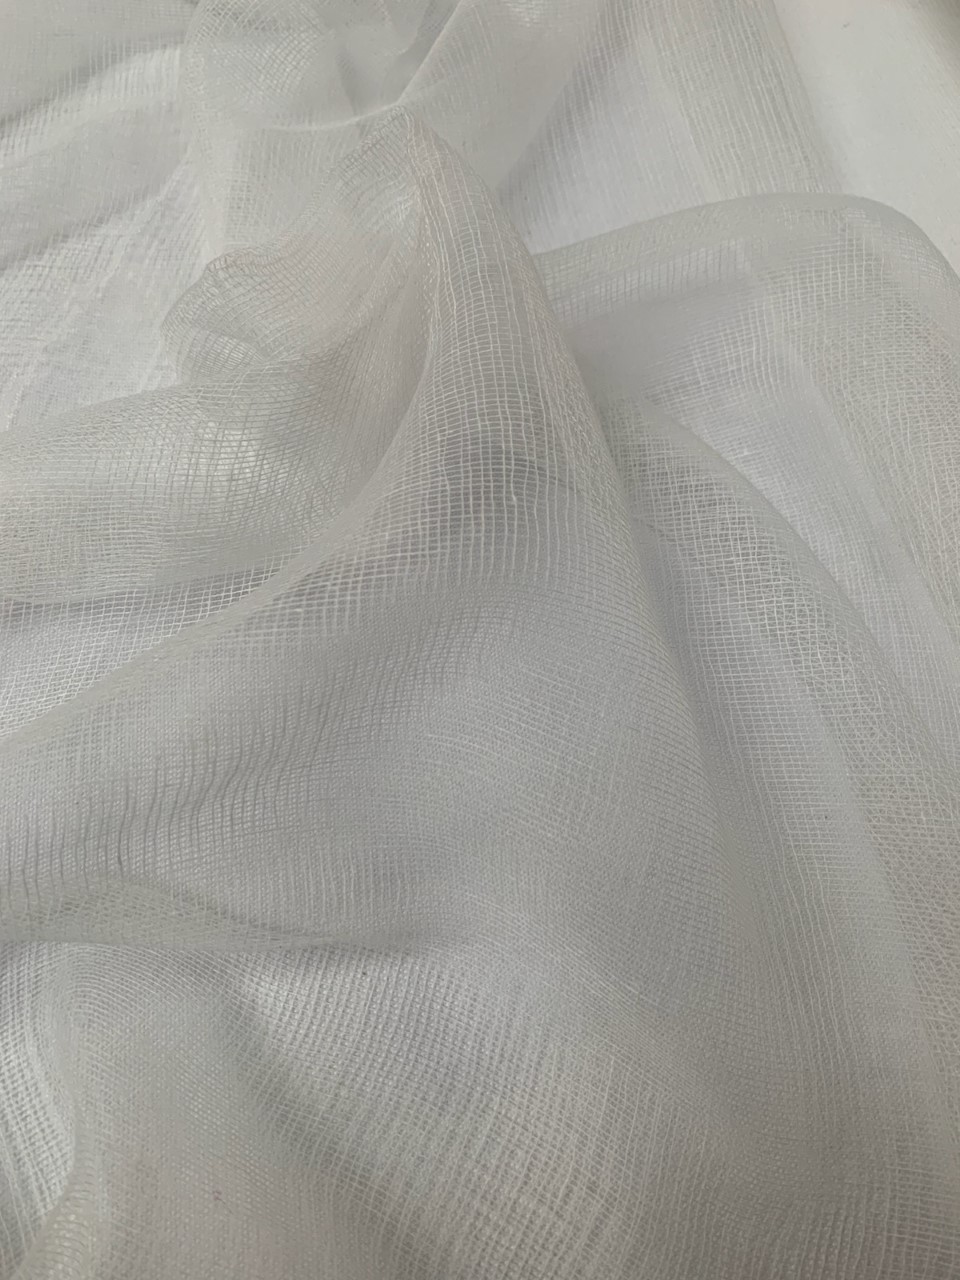 30" Wide Grade 10 Cheesecloth - 1000 Yard Roll